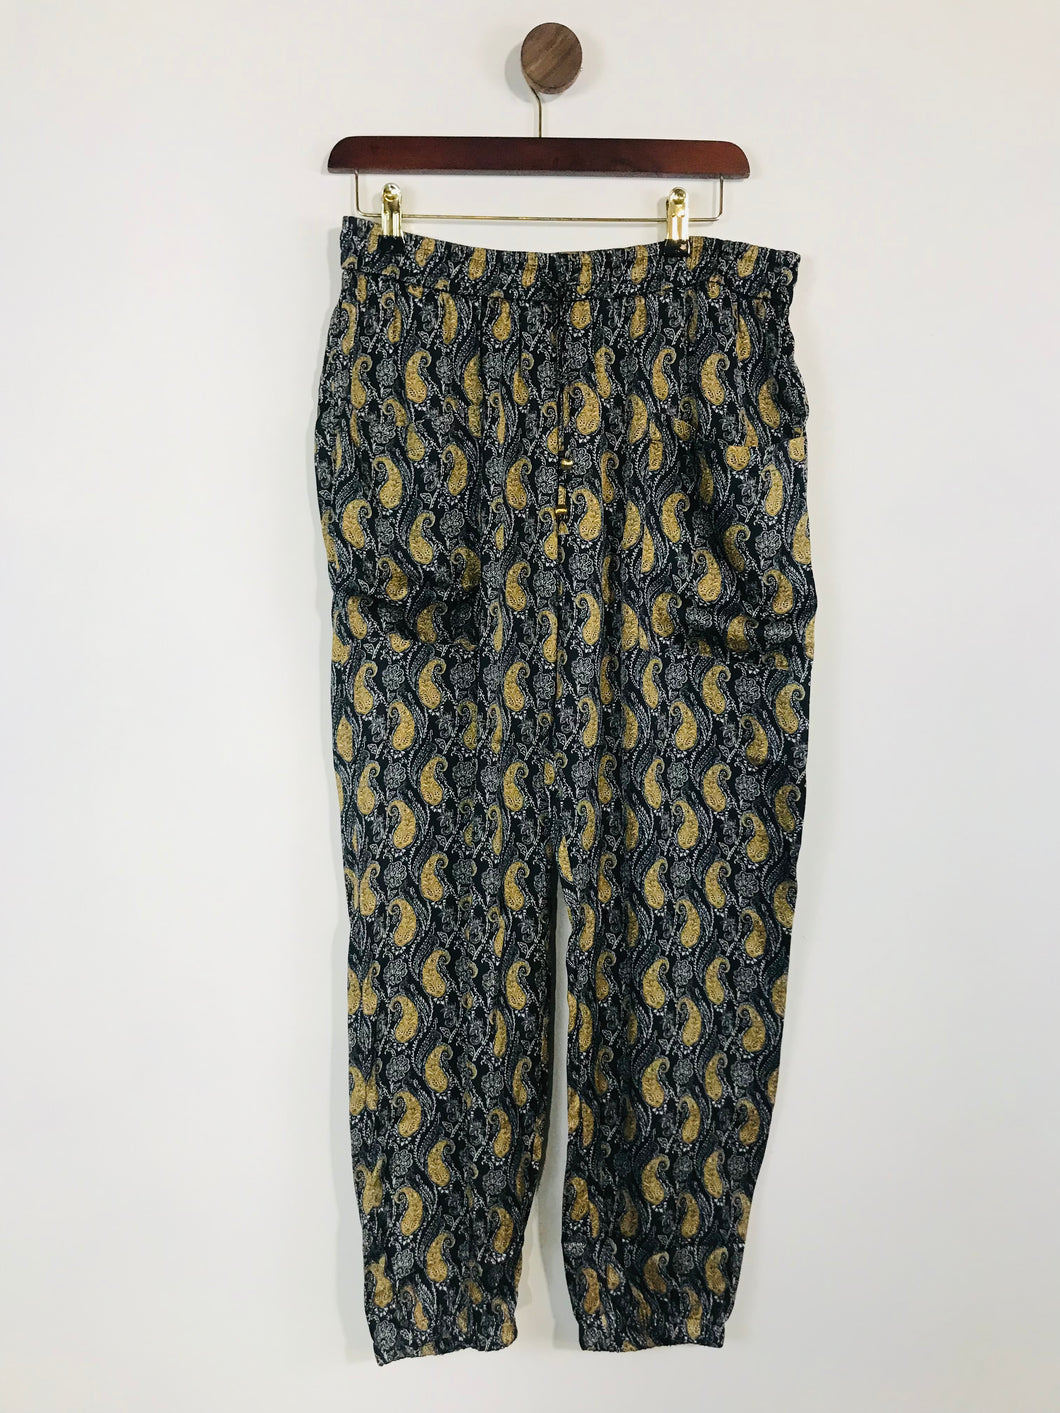 Zara Women's Patterned Joggers Casual Trousers NWT | L UK14 | Multicolour